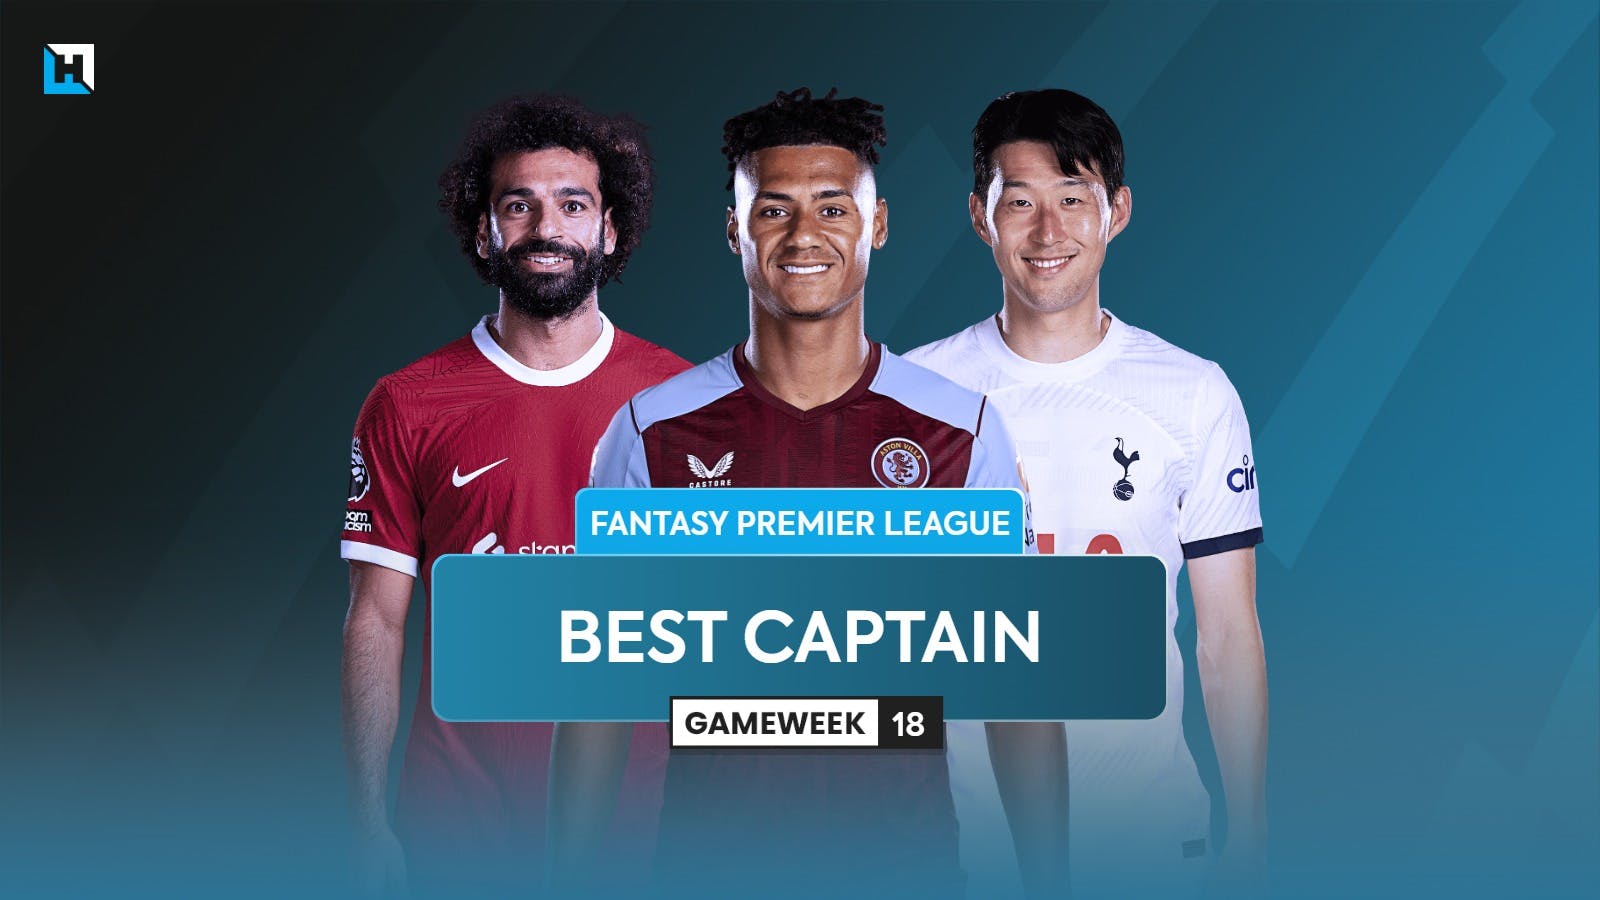 Who is the best FPL captain for Gameweek 18?